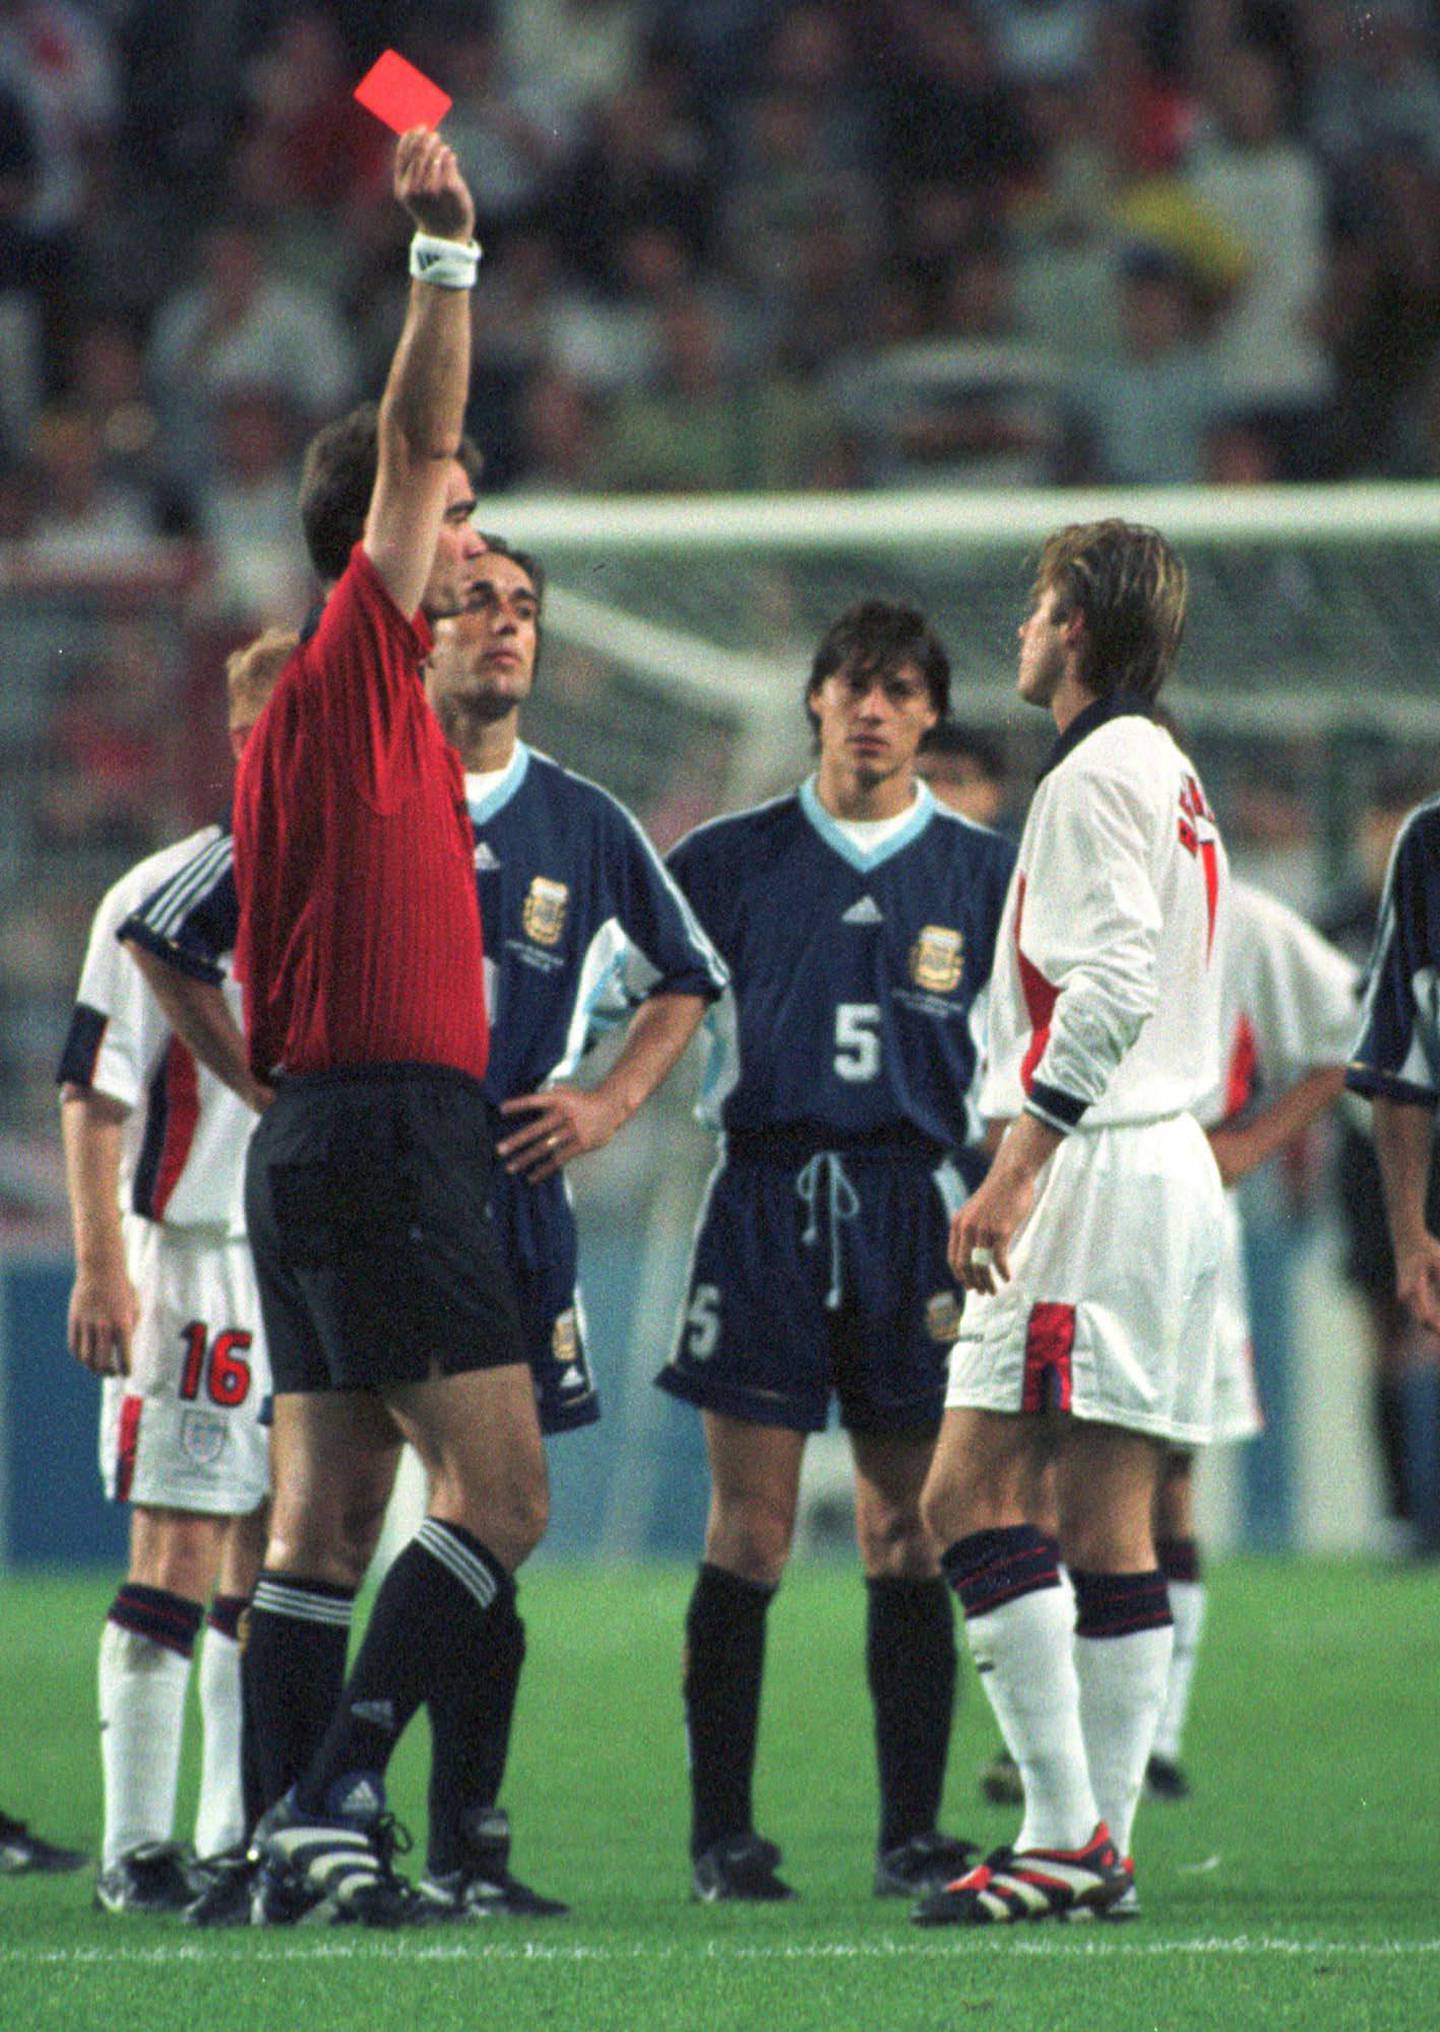 FILE - In this  June 30, 1998 file photo, England's David Beckham receives a red card from Danish referee Kim Milton Nielsen, during England's World Cup second round soccer match against Argentina, in Saint Etienne,  France. On this day: Beckham becomes public enemy number one in England, after he gets a red card for kicking Argentina's Diego Simeone. England lost on penalties after the match ended 2-2. (AP Photo/Denis Doyle, File)